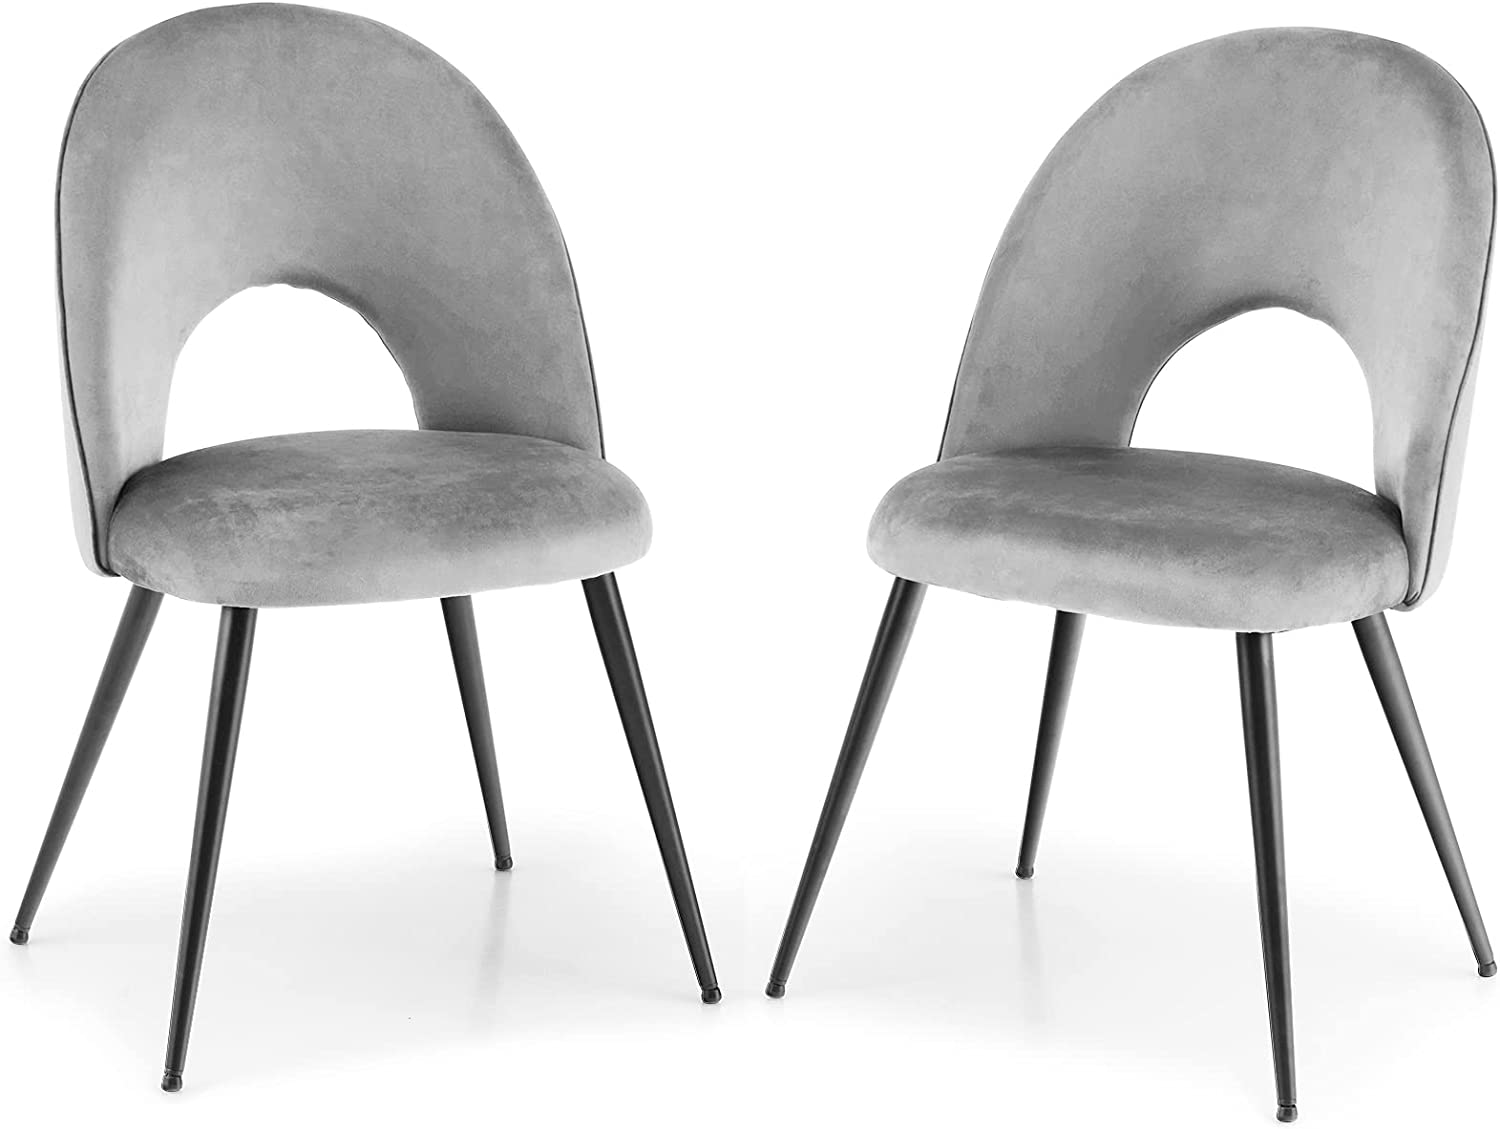 Giantex Velvet Dining Chairs Set of 2 or 4 - Modern Mid-Century Vanity Chair with Meat Legs